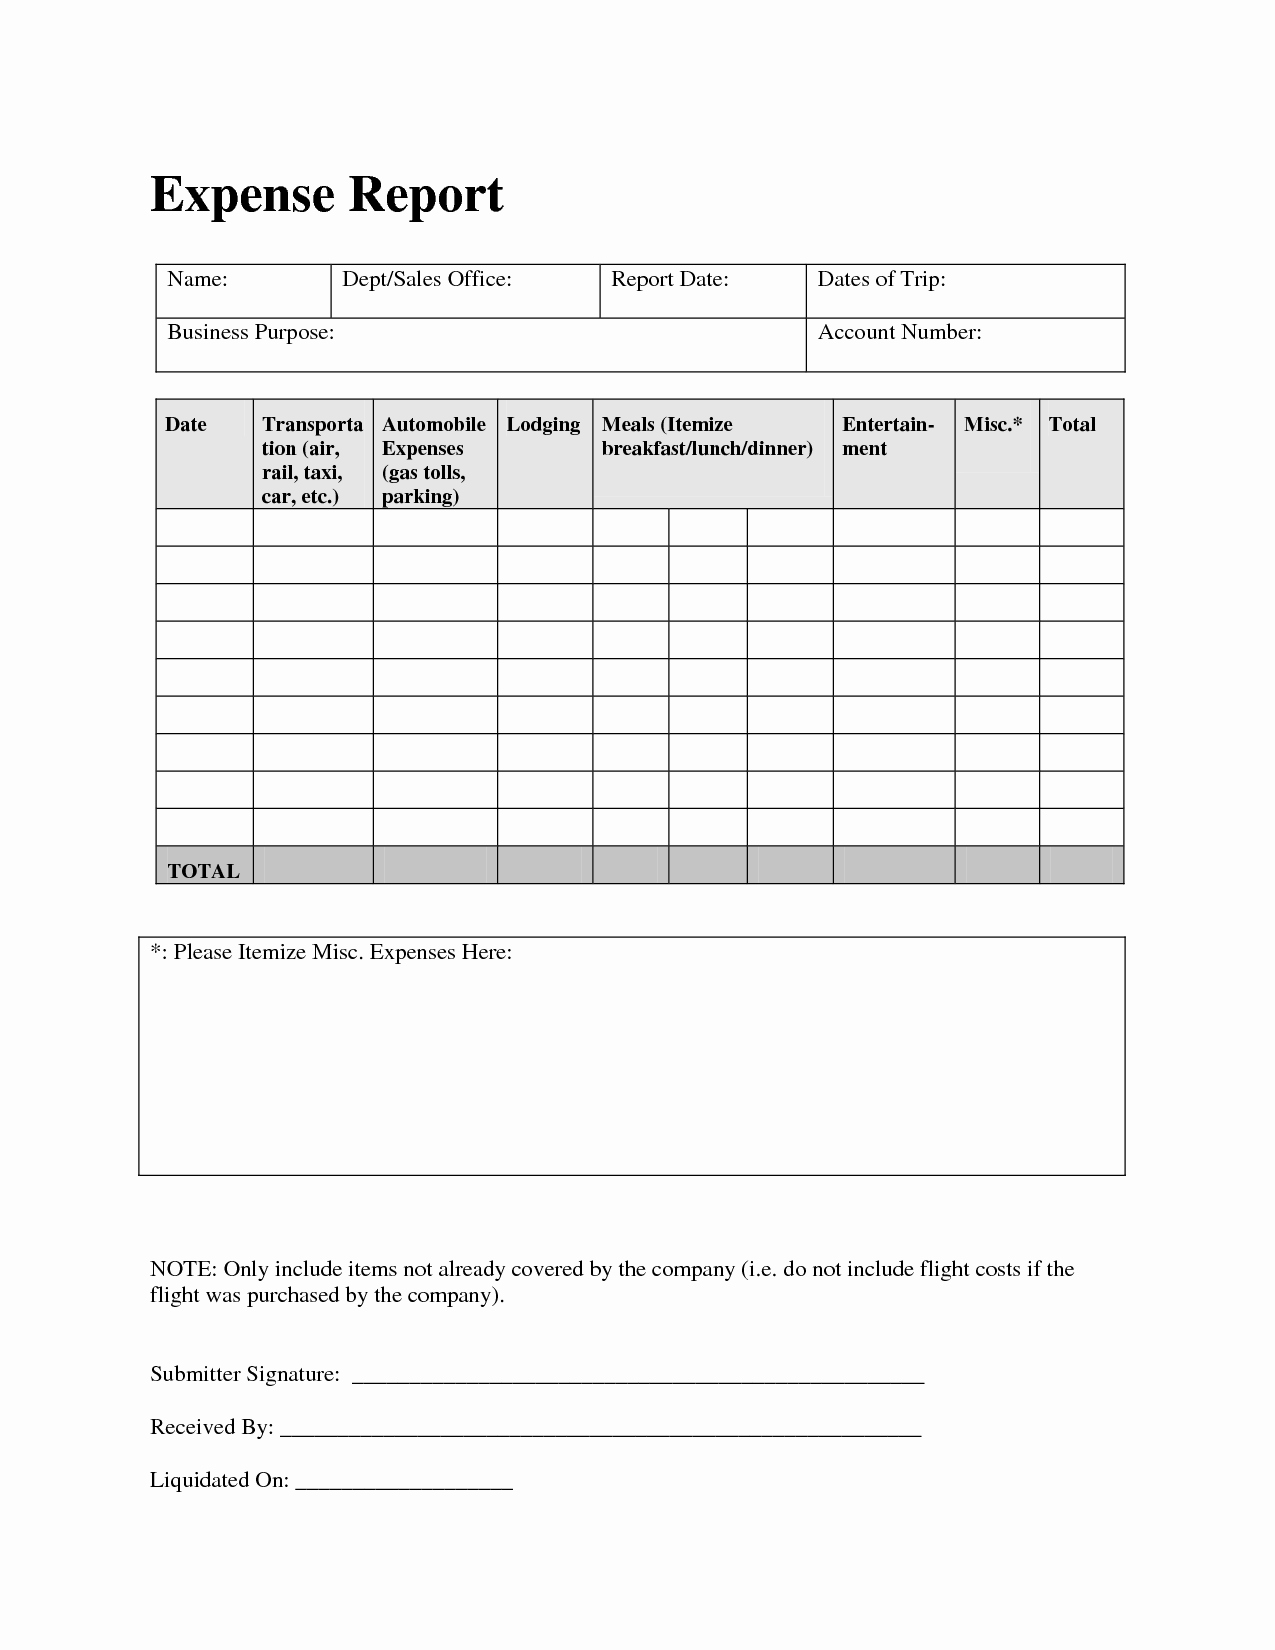 Excel Expense Report Template Fresh Outstanding Excel Expense Report Template by Whitecheese